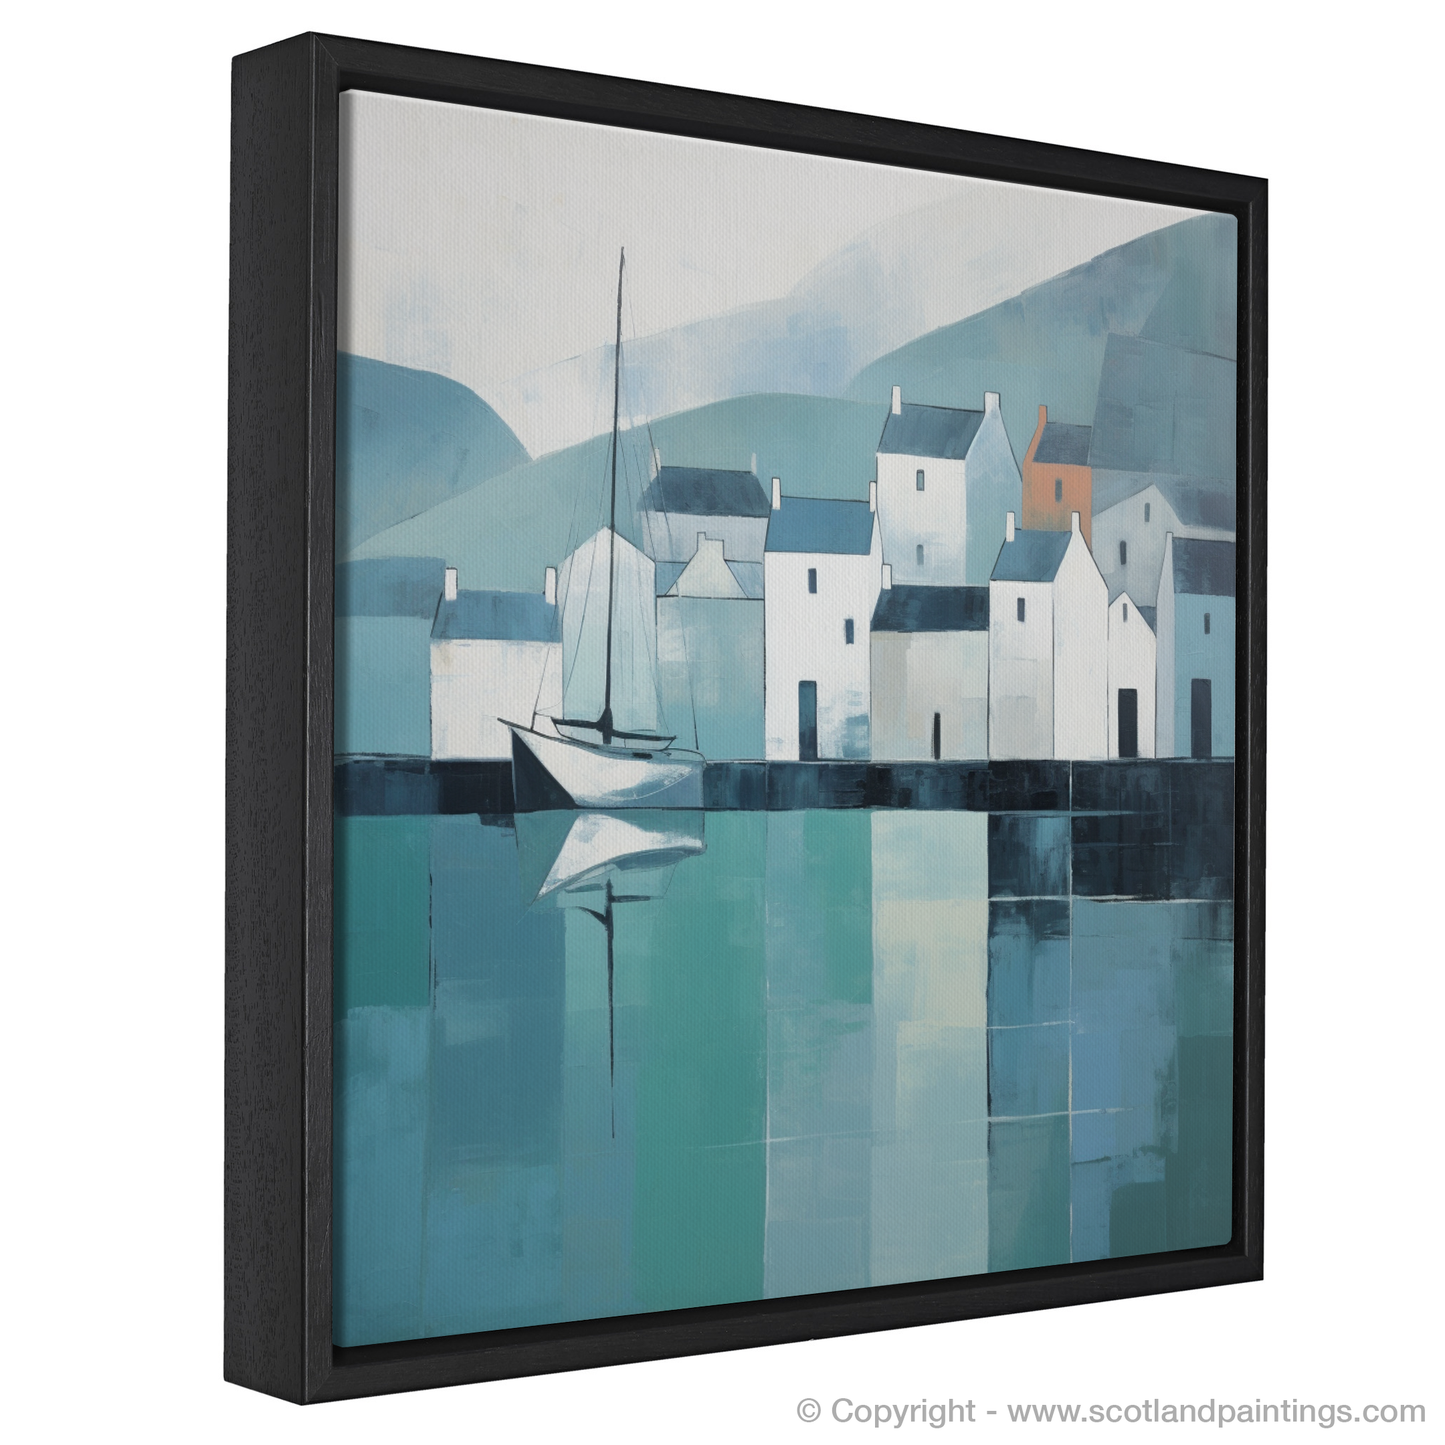 Serenity at Portree Harbour: A Minimalist Tribute